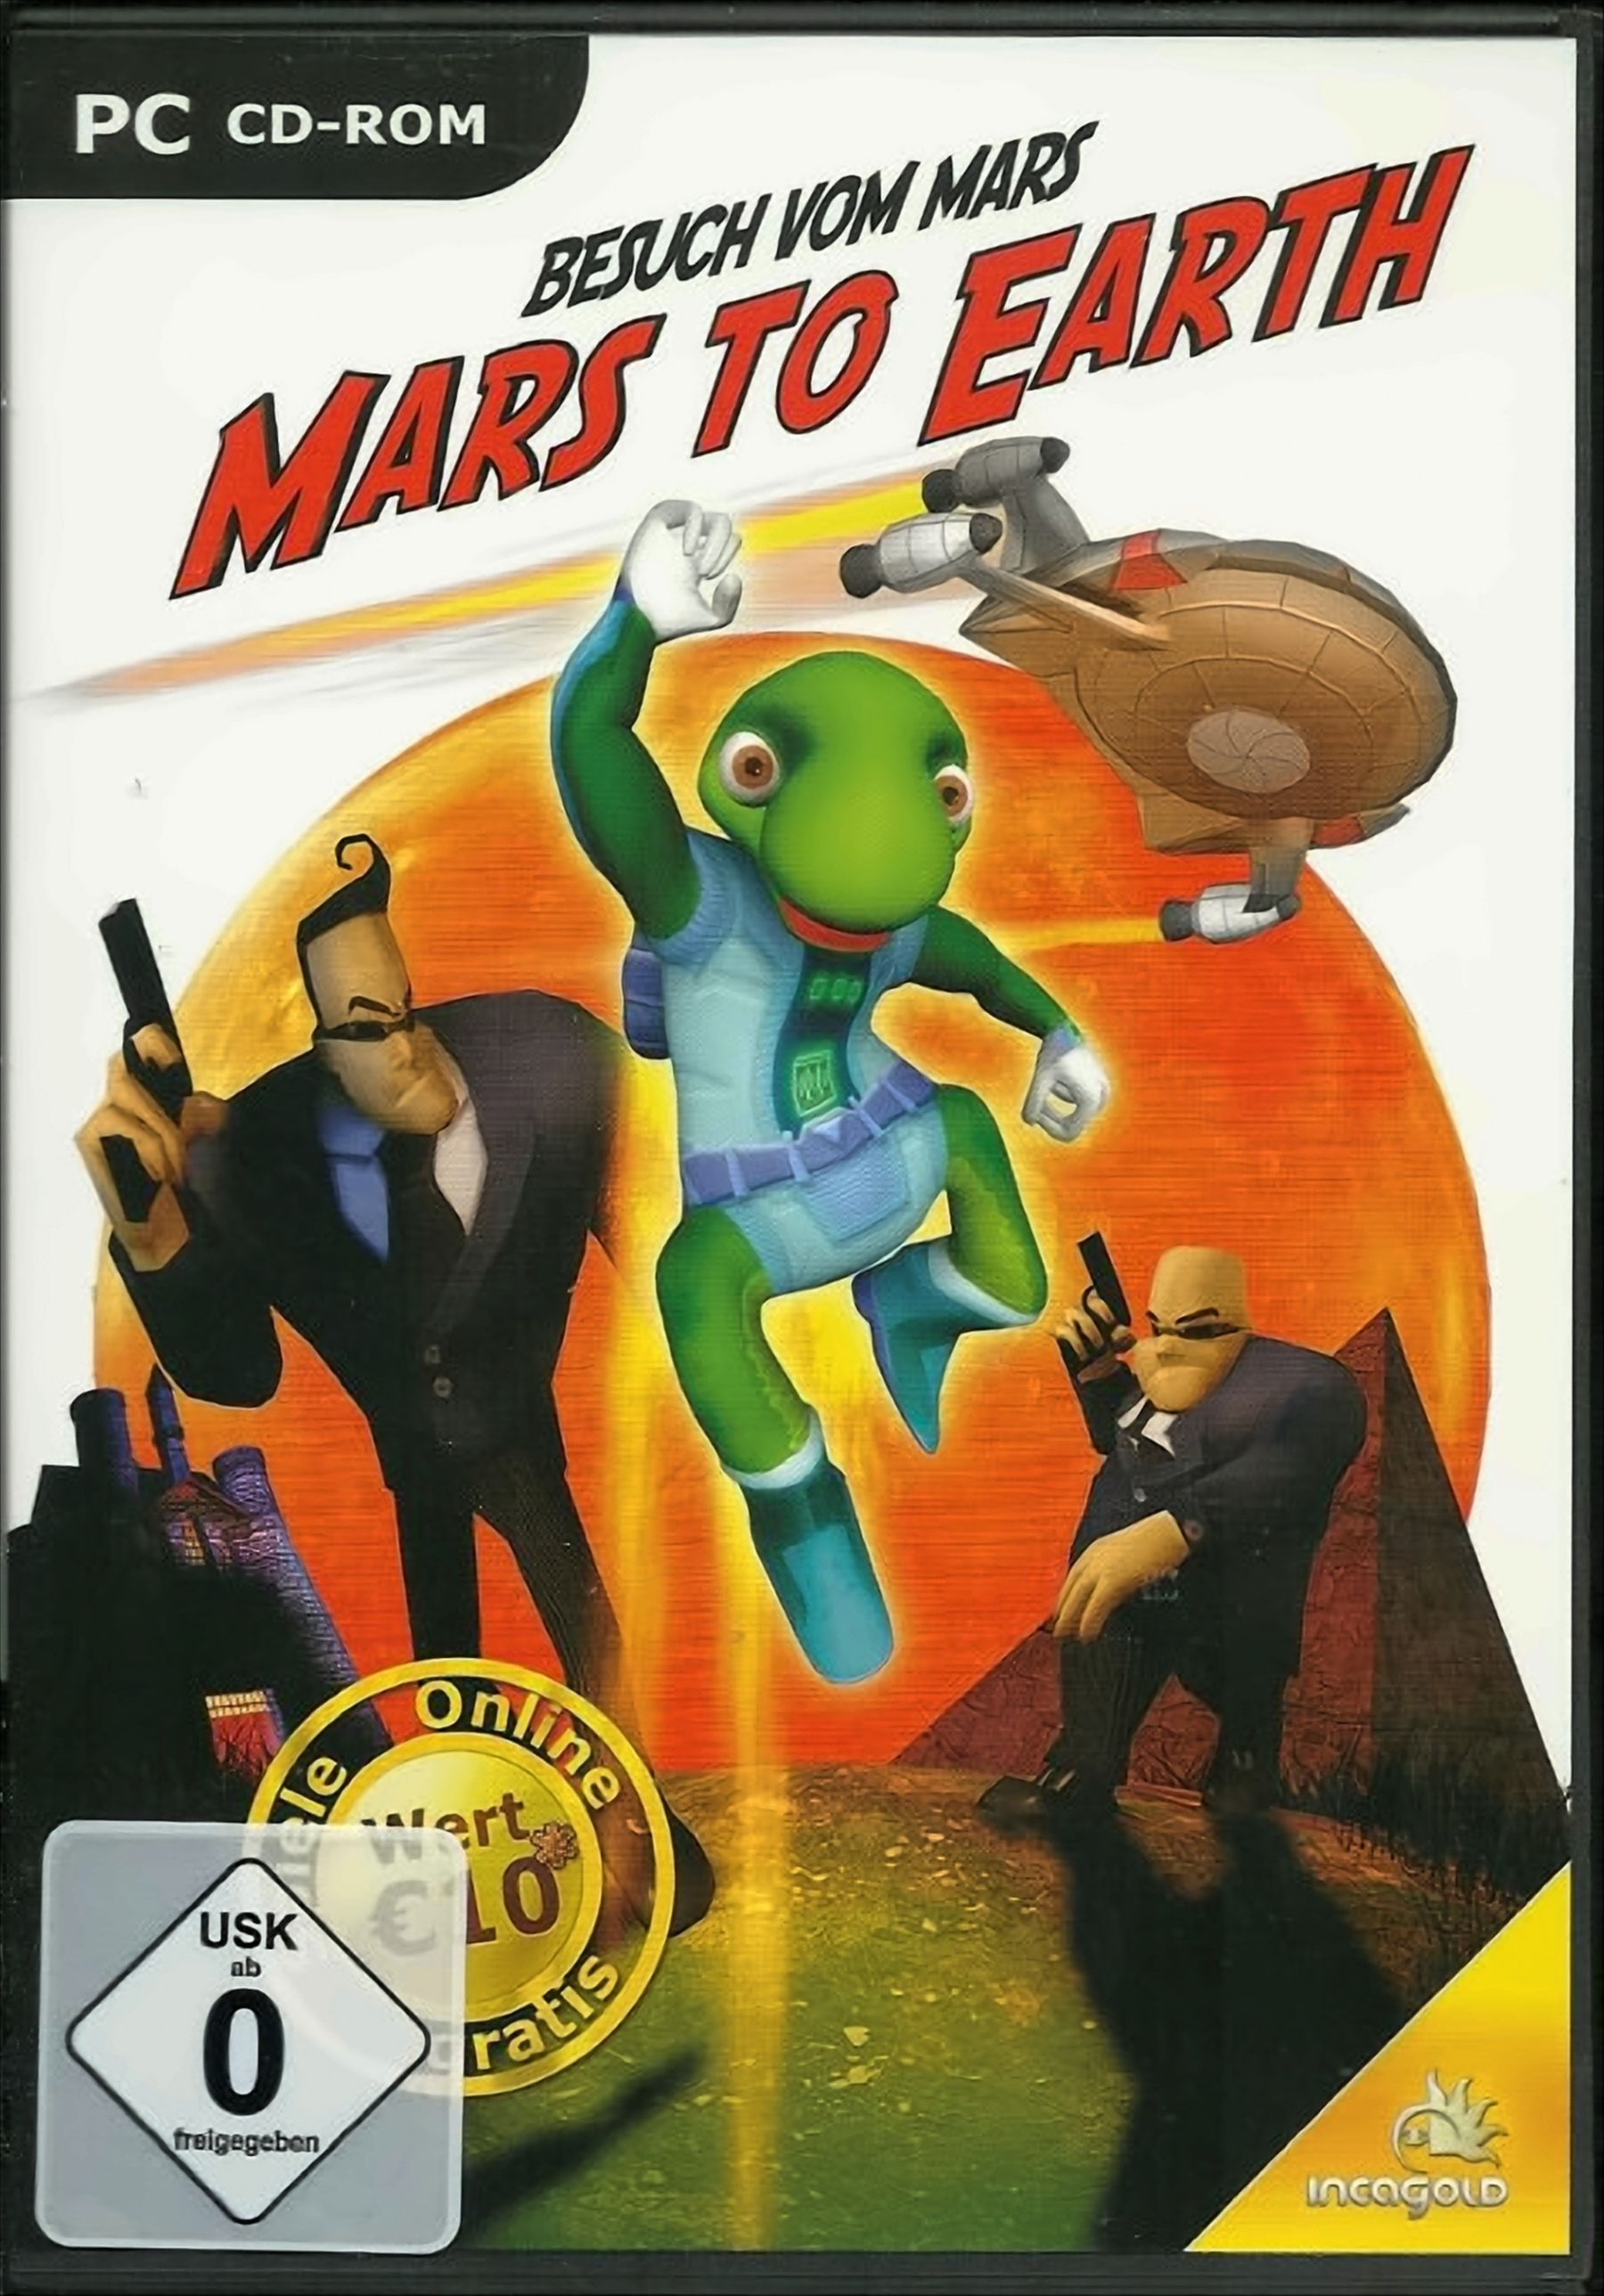 Mars to vom Besuch Mars Earth [PC] - 